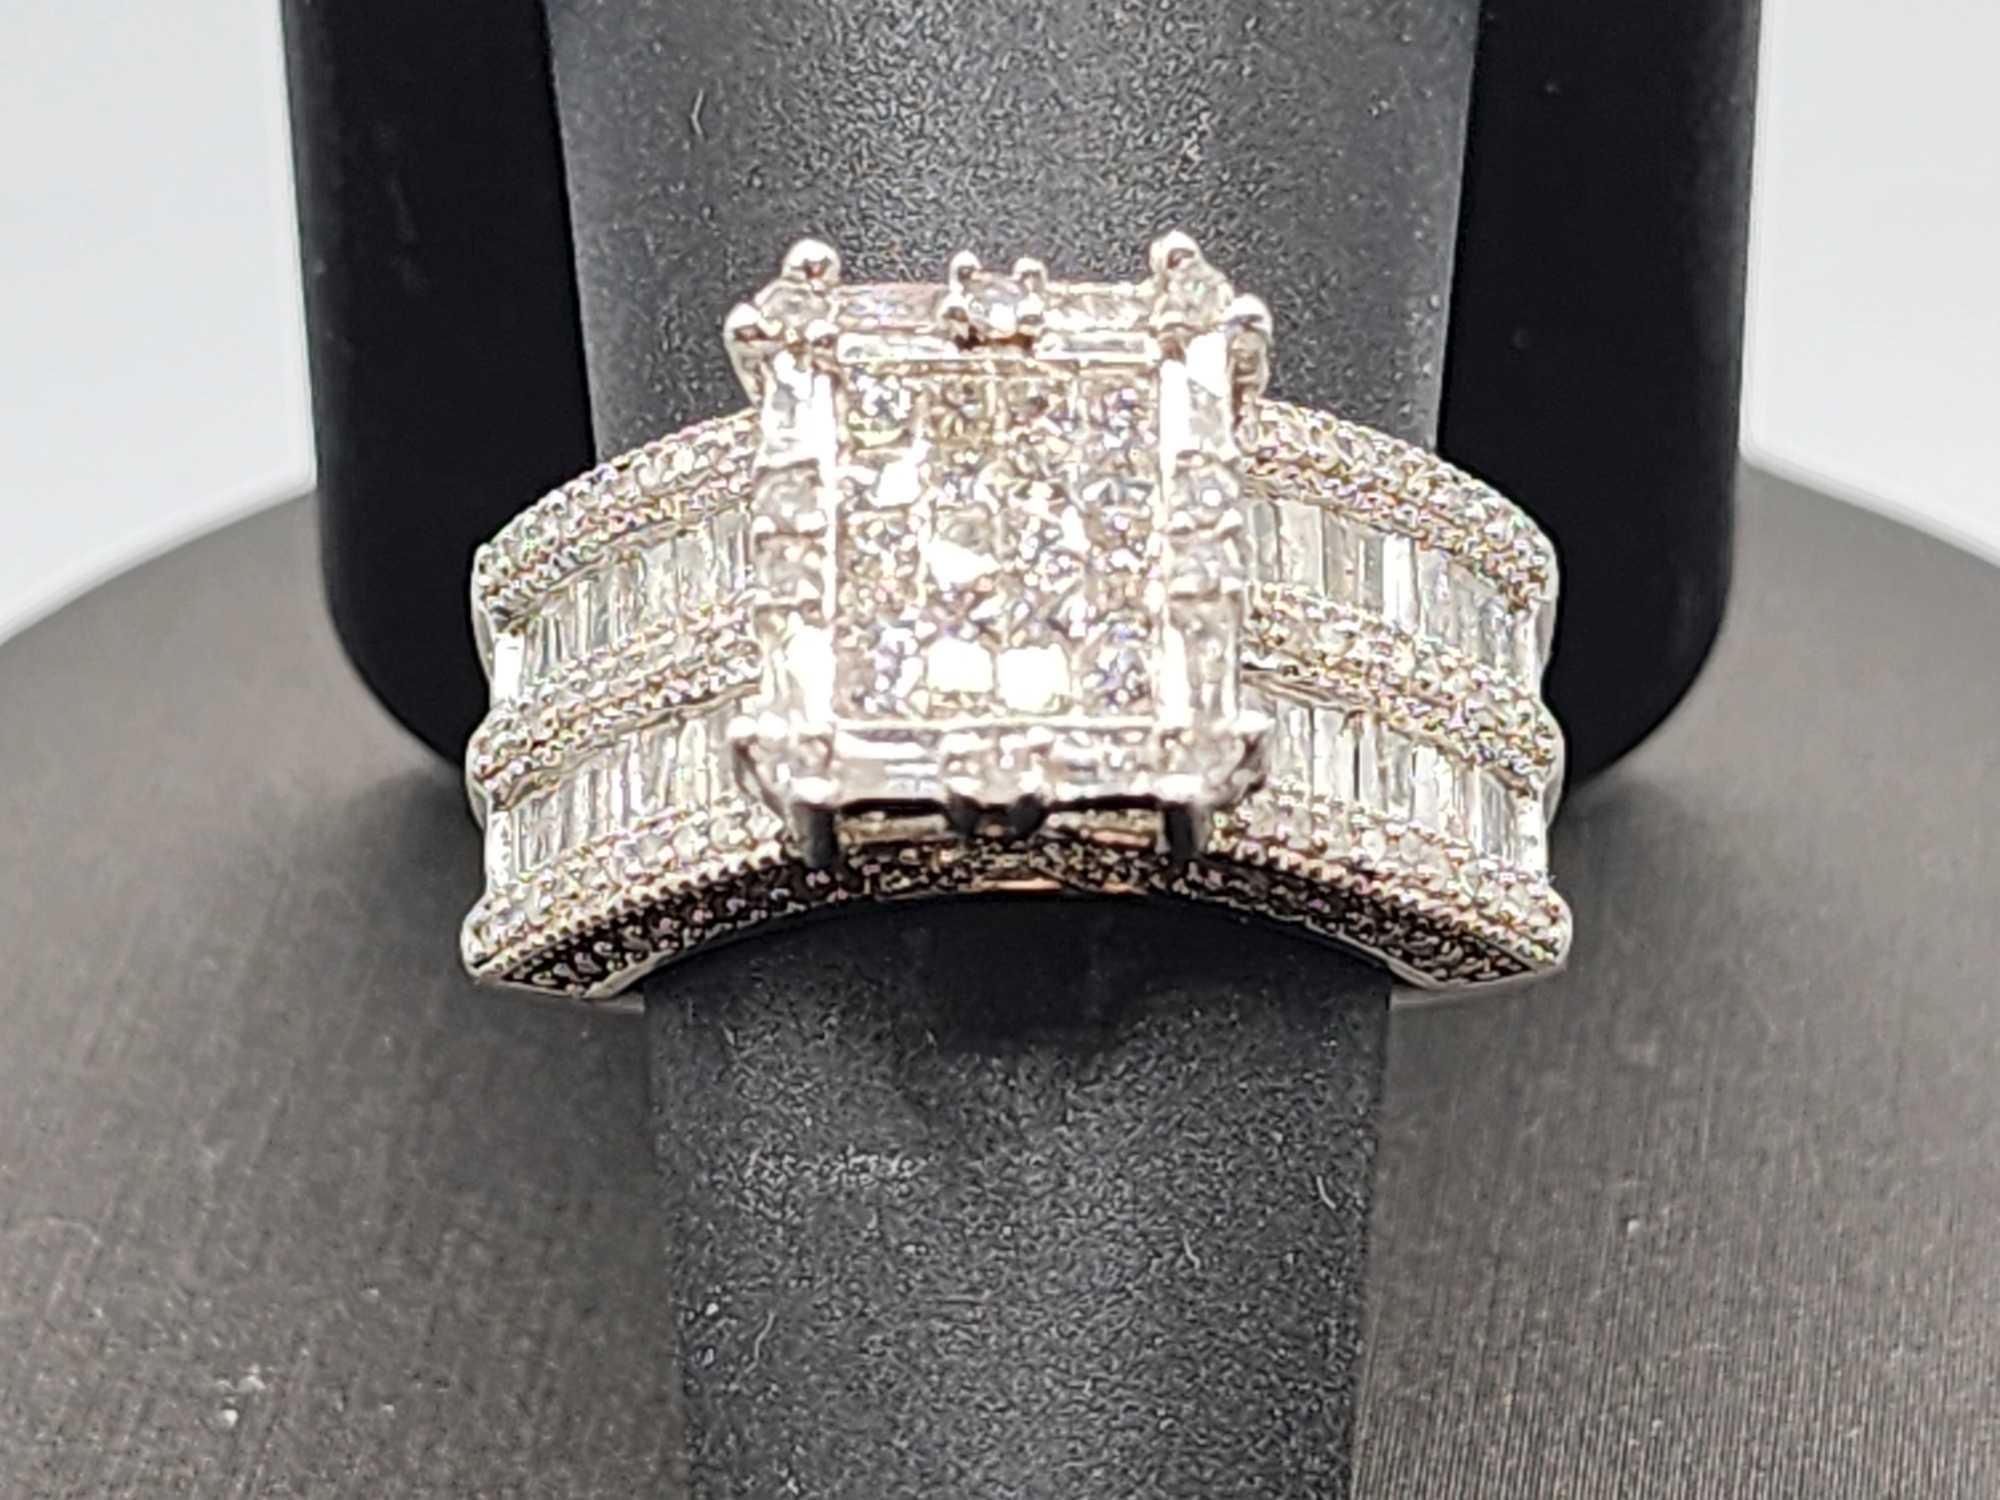 Genuine 3 carats of diamonds, pave sterling silver ring, size 7